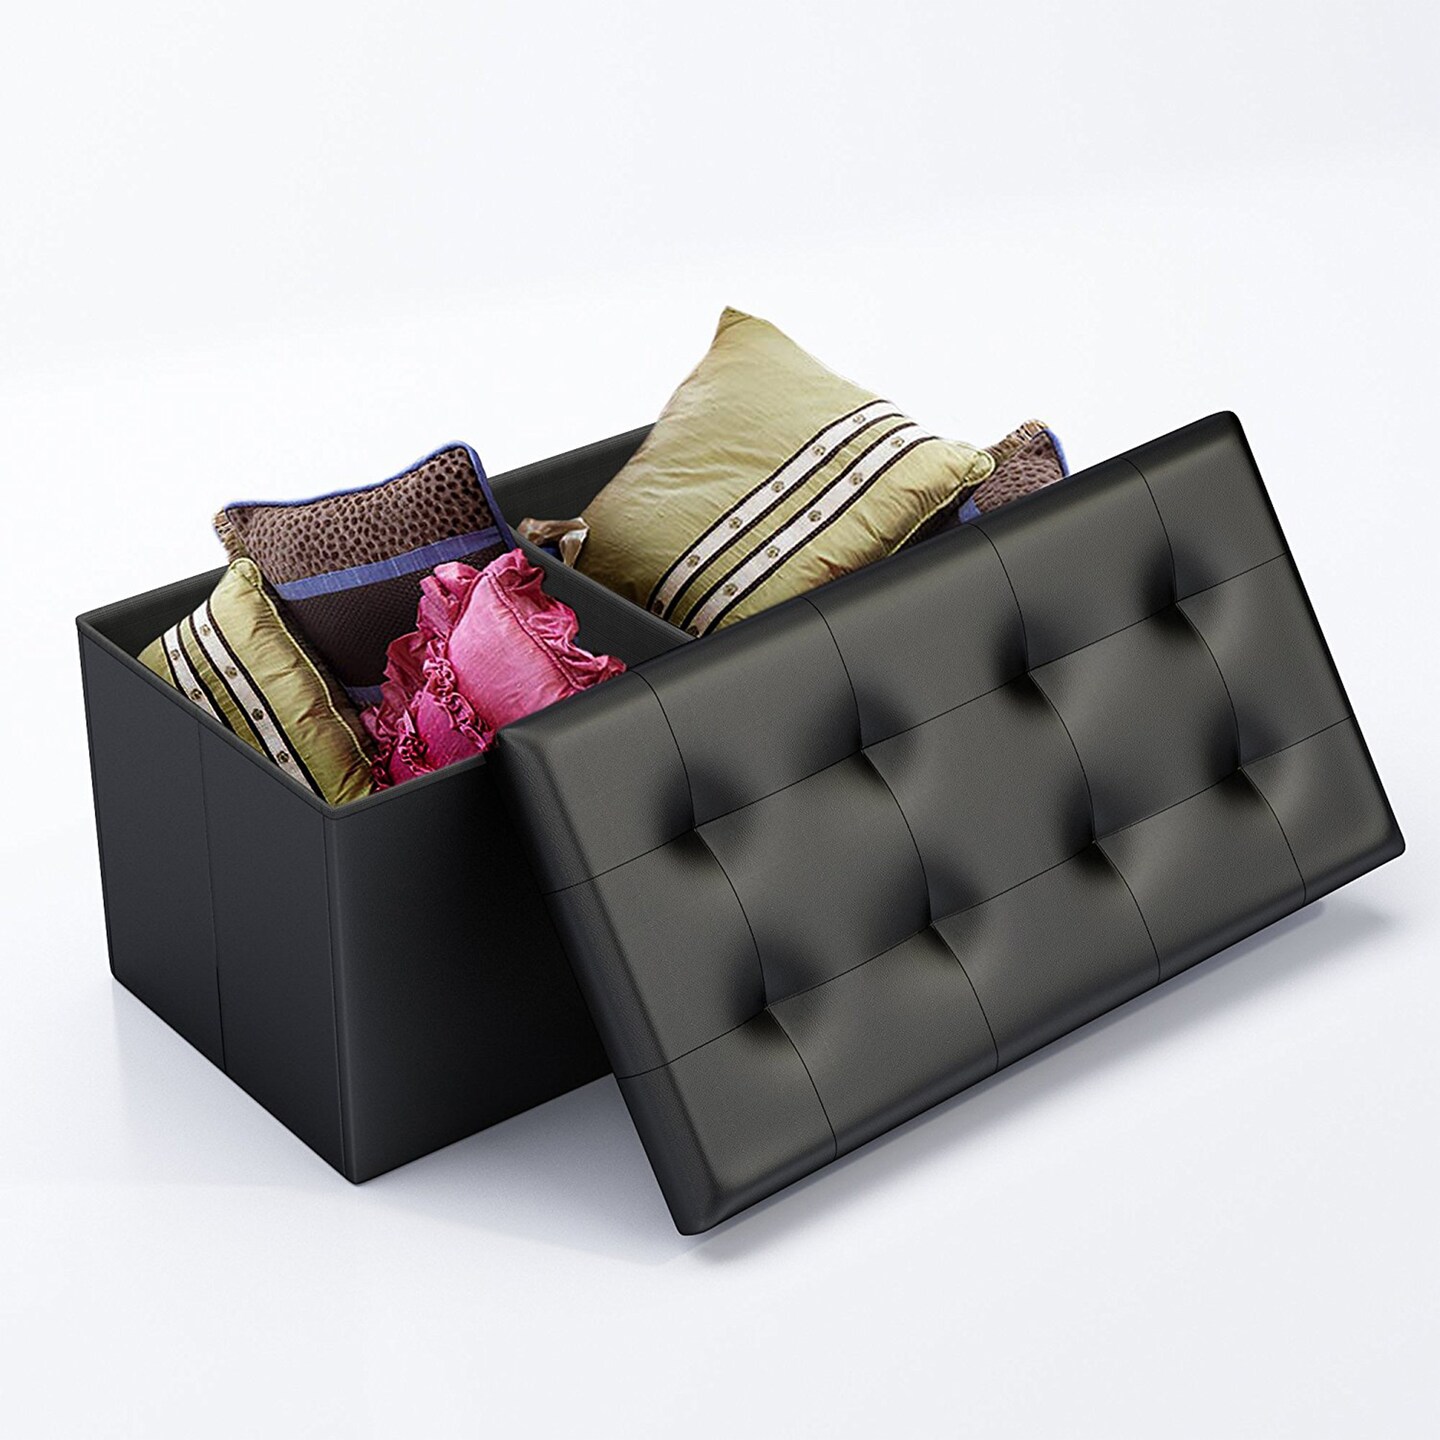 Home-Complete Faux Leather Foot Stool Storage Ottoman Bench with Lid 30 x 15 x 14.75 Inches